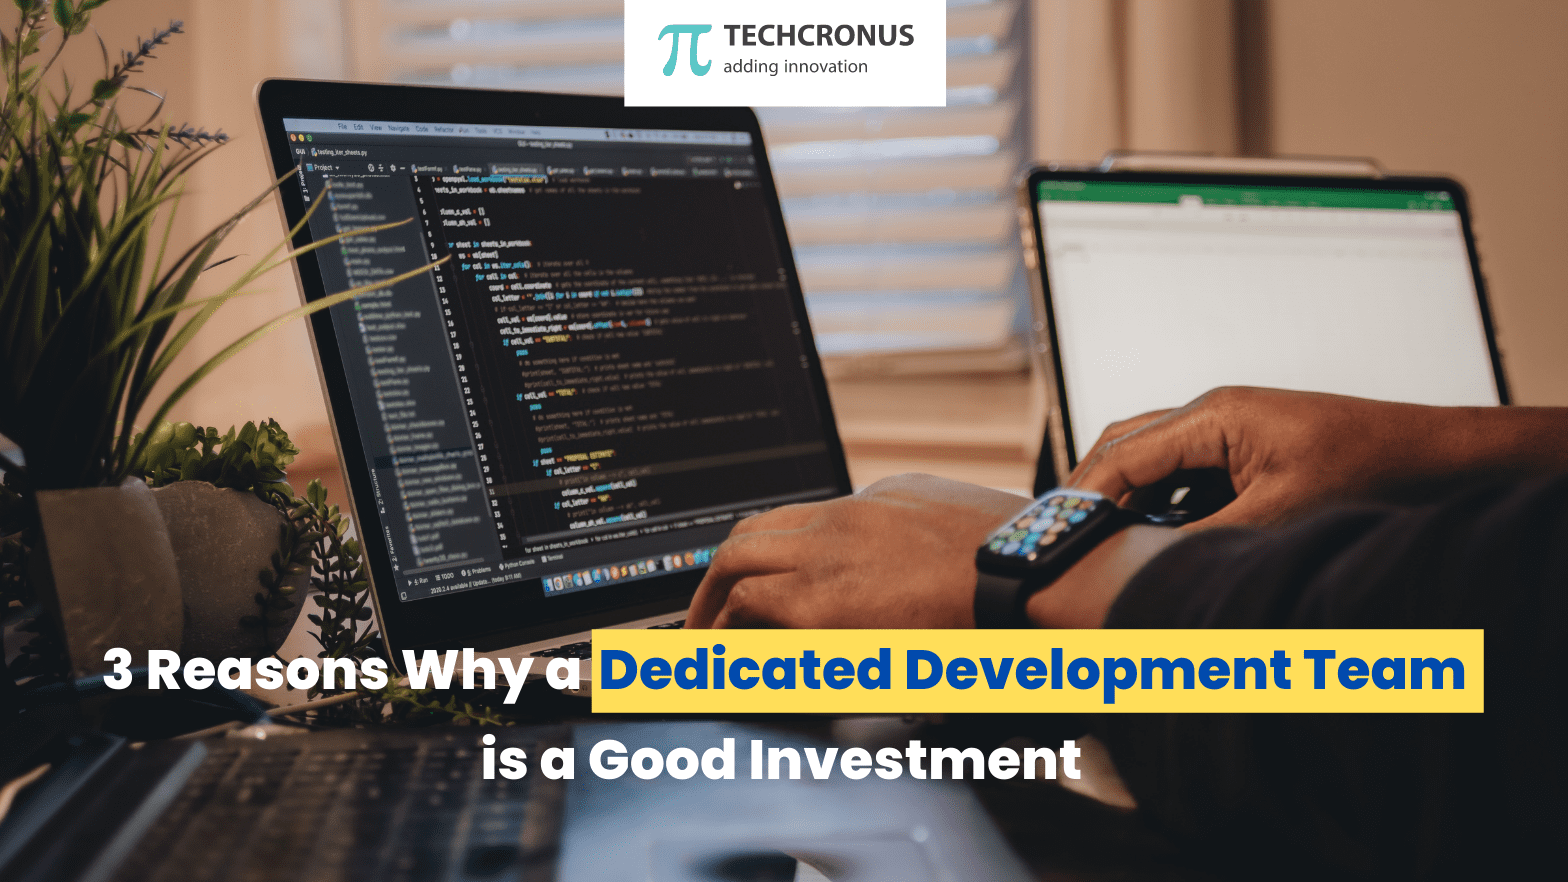 3 Reasons Why a Dedicated Development Team is a Good Investment